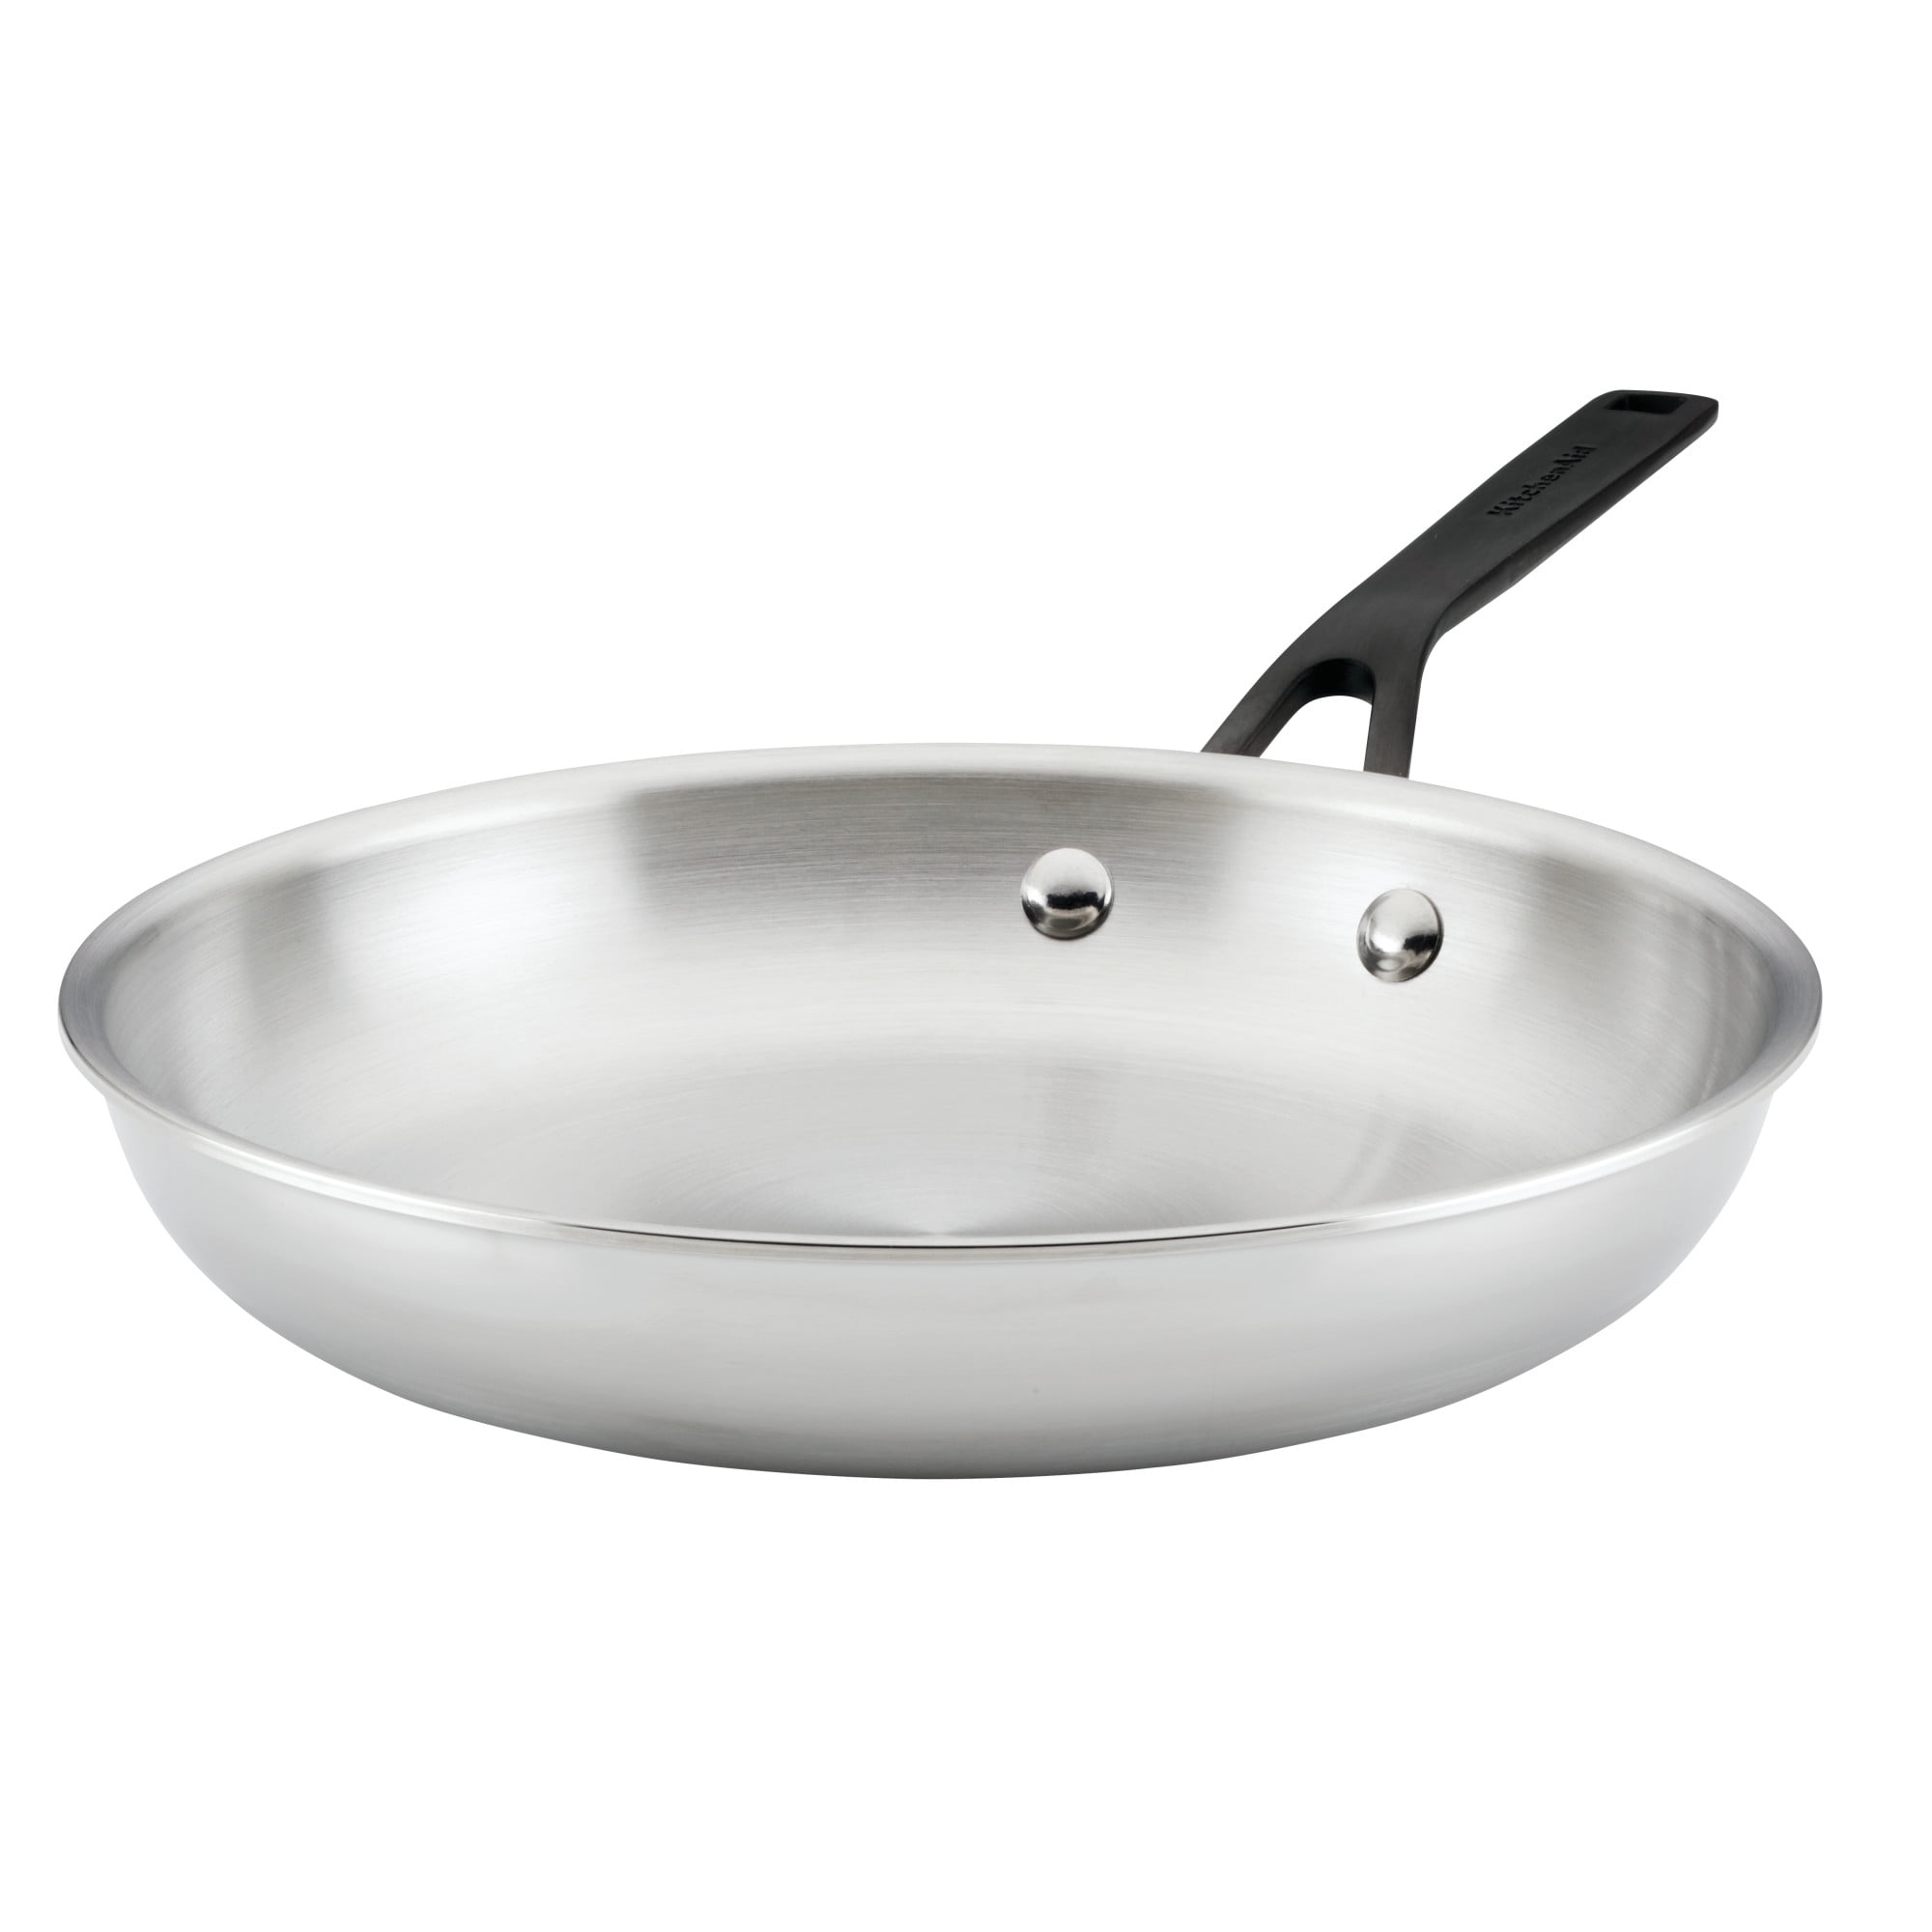 American Clad 5-ply Stainless 10.5 Fry Pan with Lid